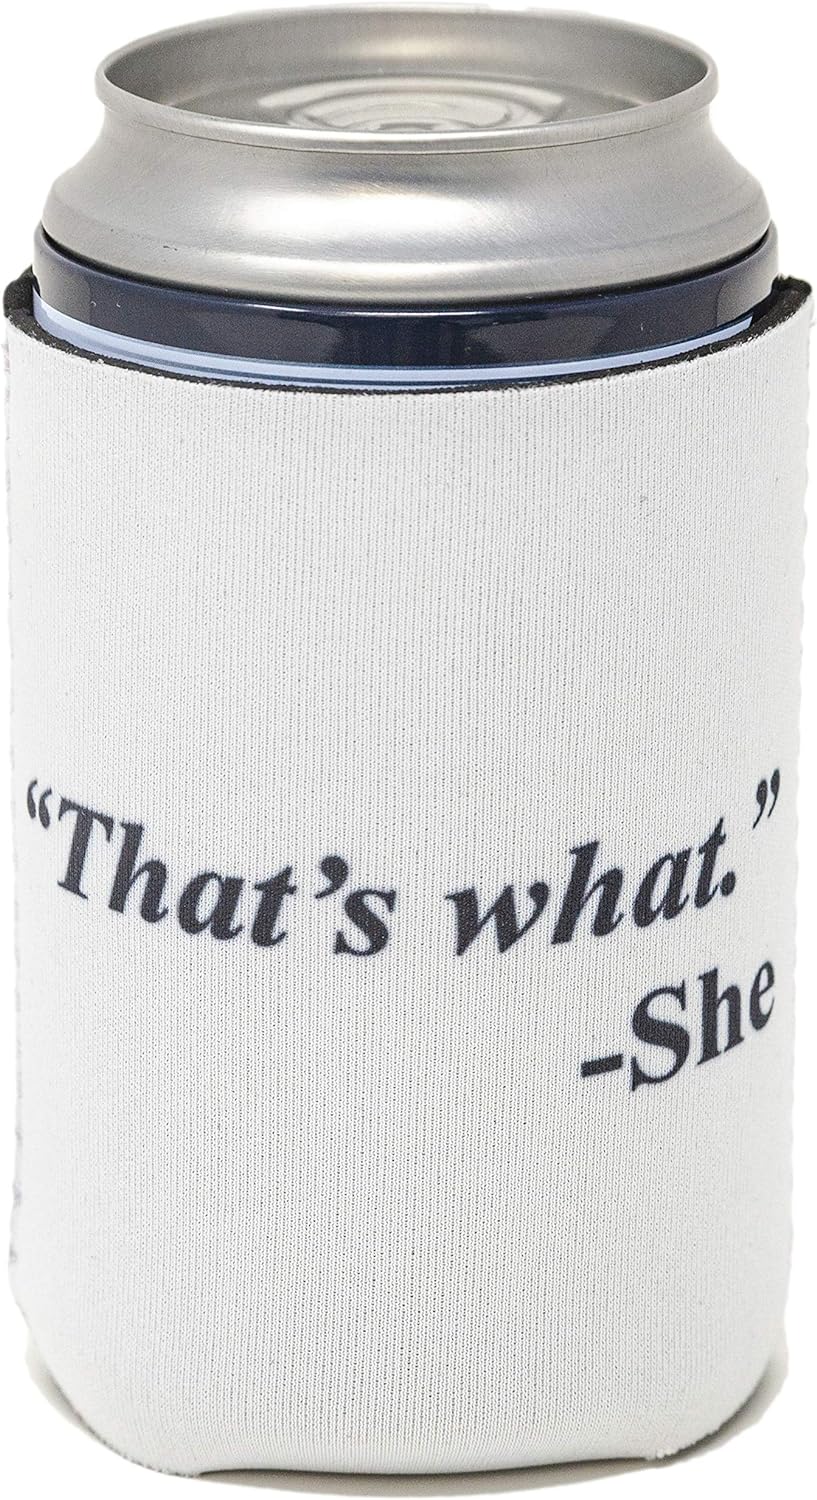 Funny Guy Mugs That's What She Said Can Coolie